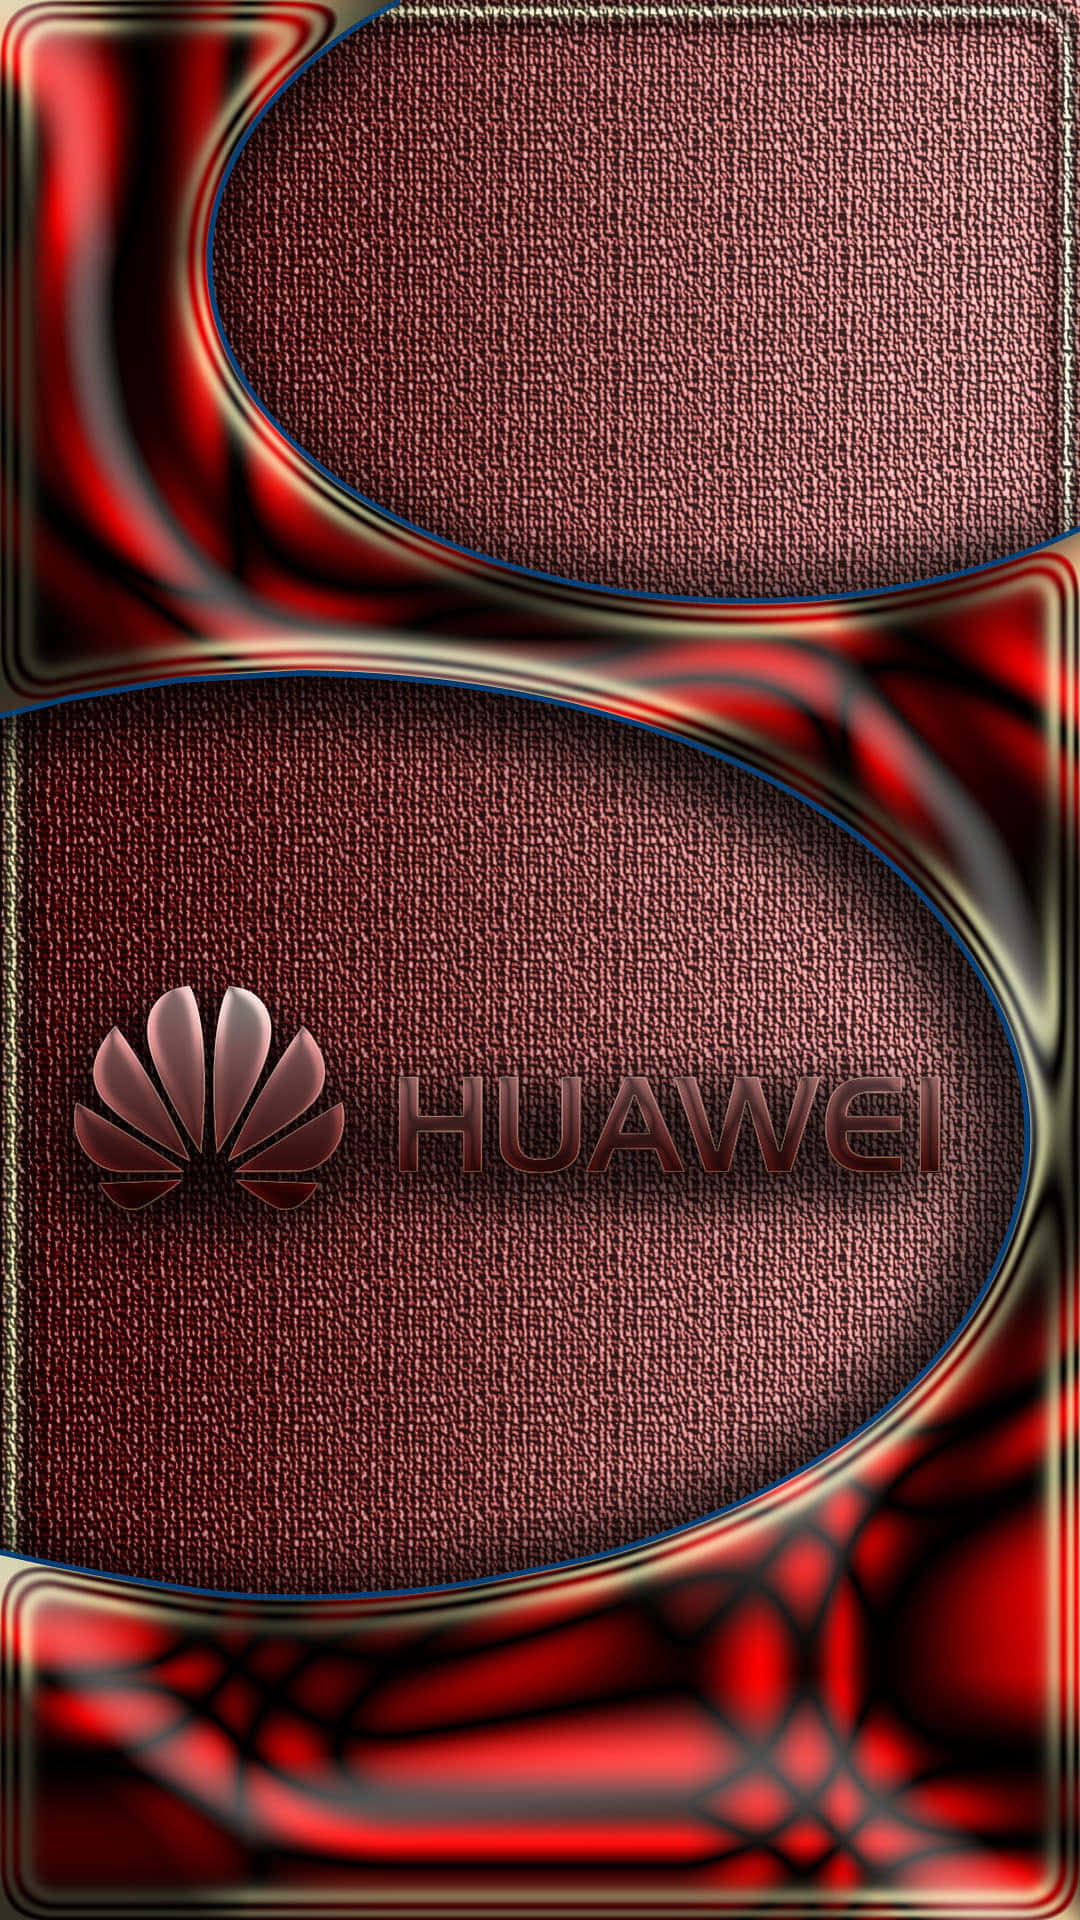 Huawei unveils the latest must-have smartphone technology